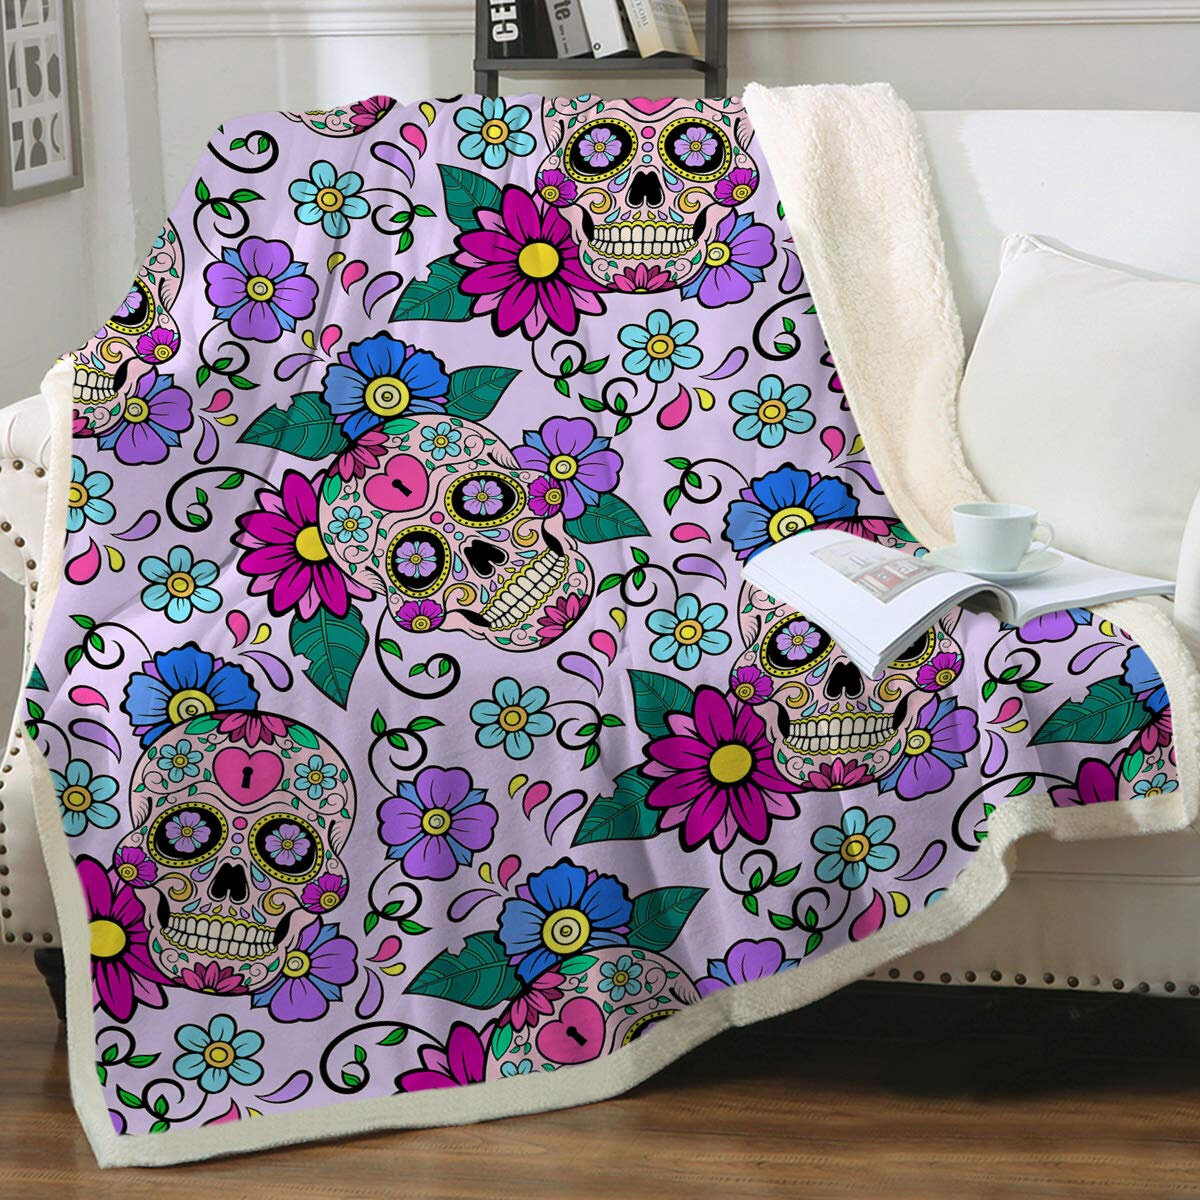 Bed Throw Blanket for Couch Soft Flannel Fuzzy Blanket Wing Sugar Skull Fleece Throw Blankets Warm Blankets for Winter 50x60 Inches Sofa 